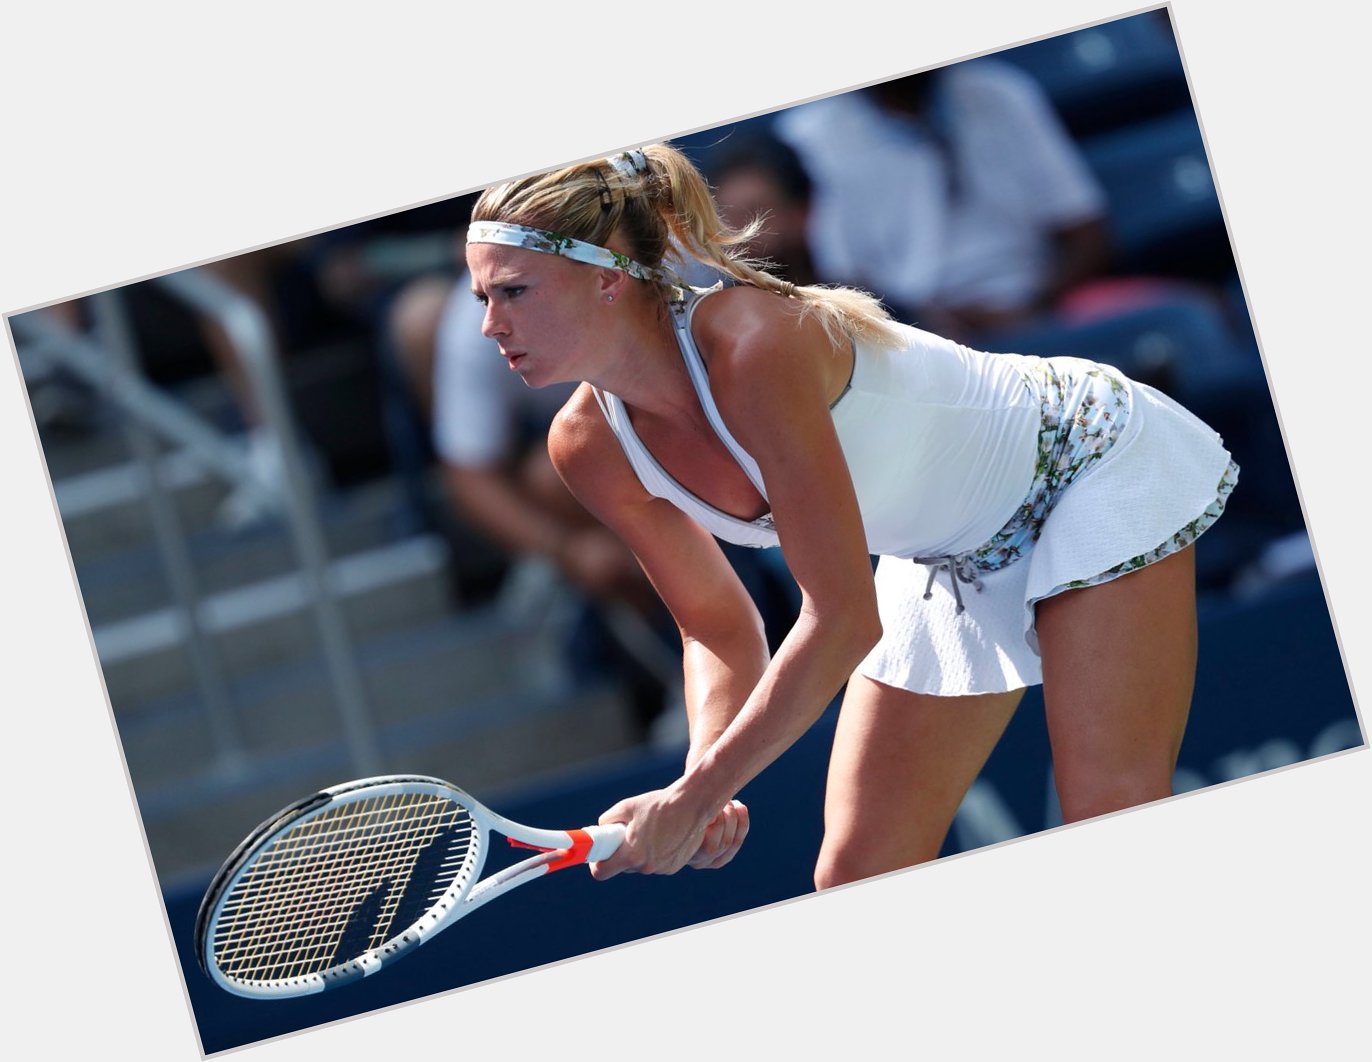 Buon Compleanno!    Join us in wishing a Happy Birthday to Camila Giorgi...  